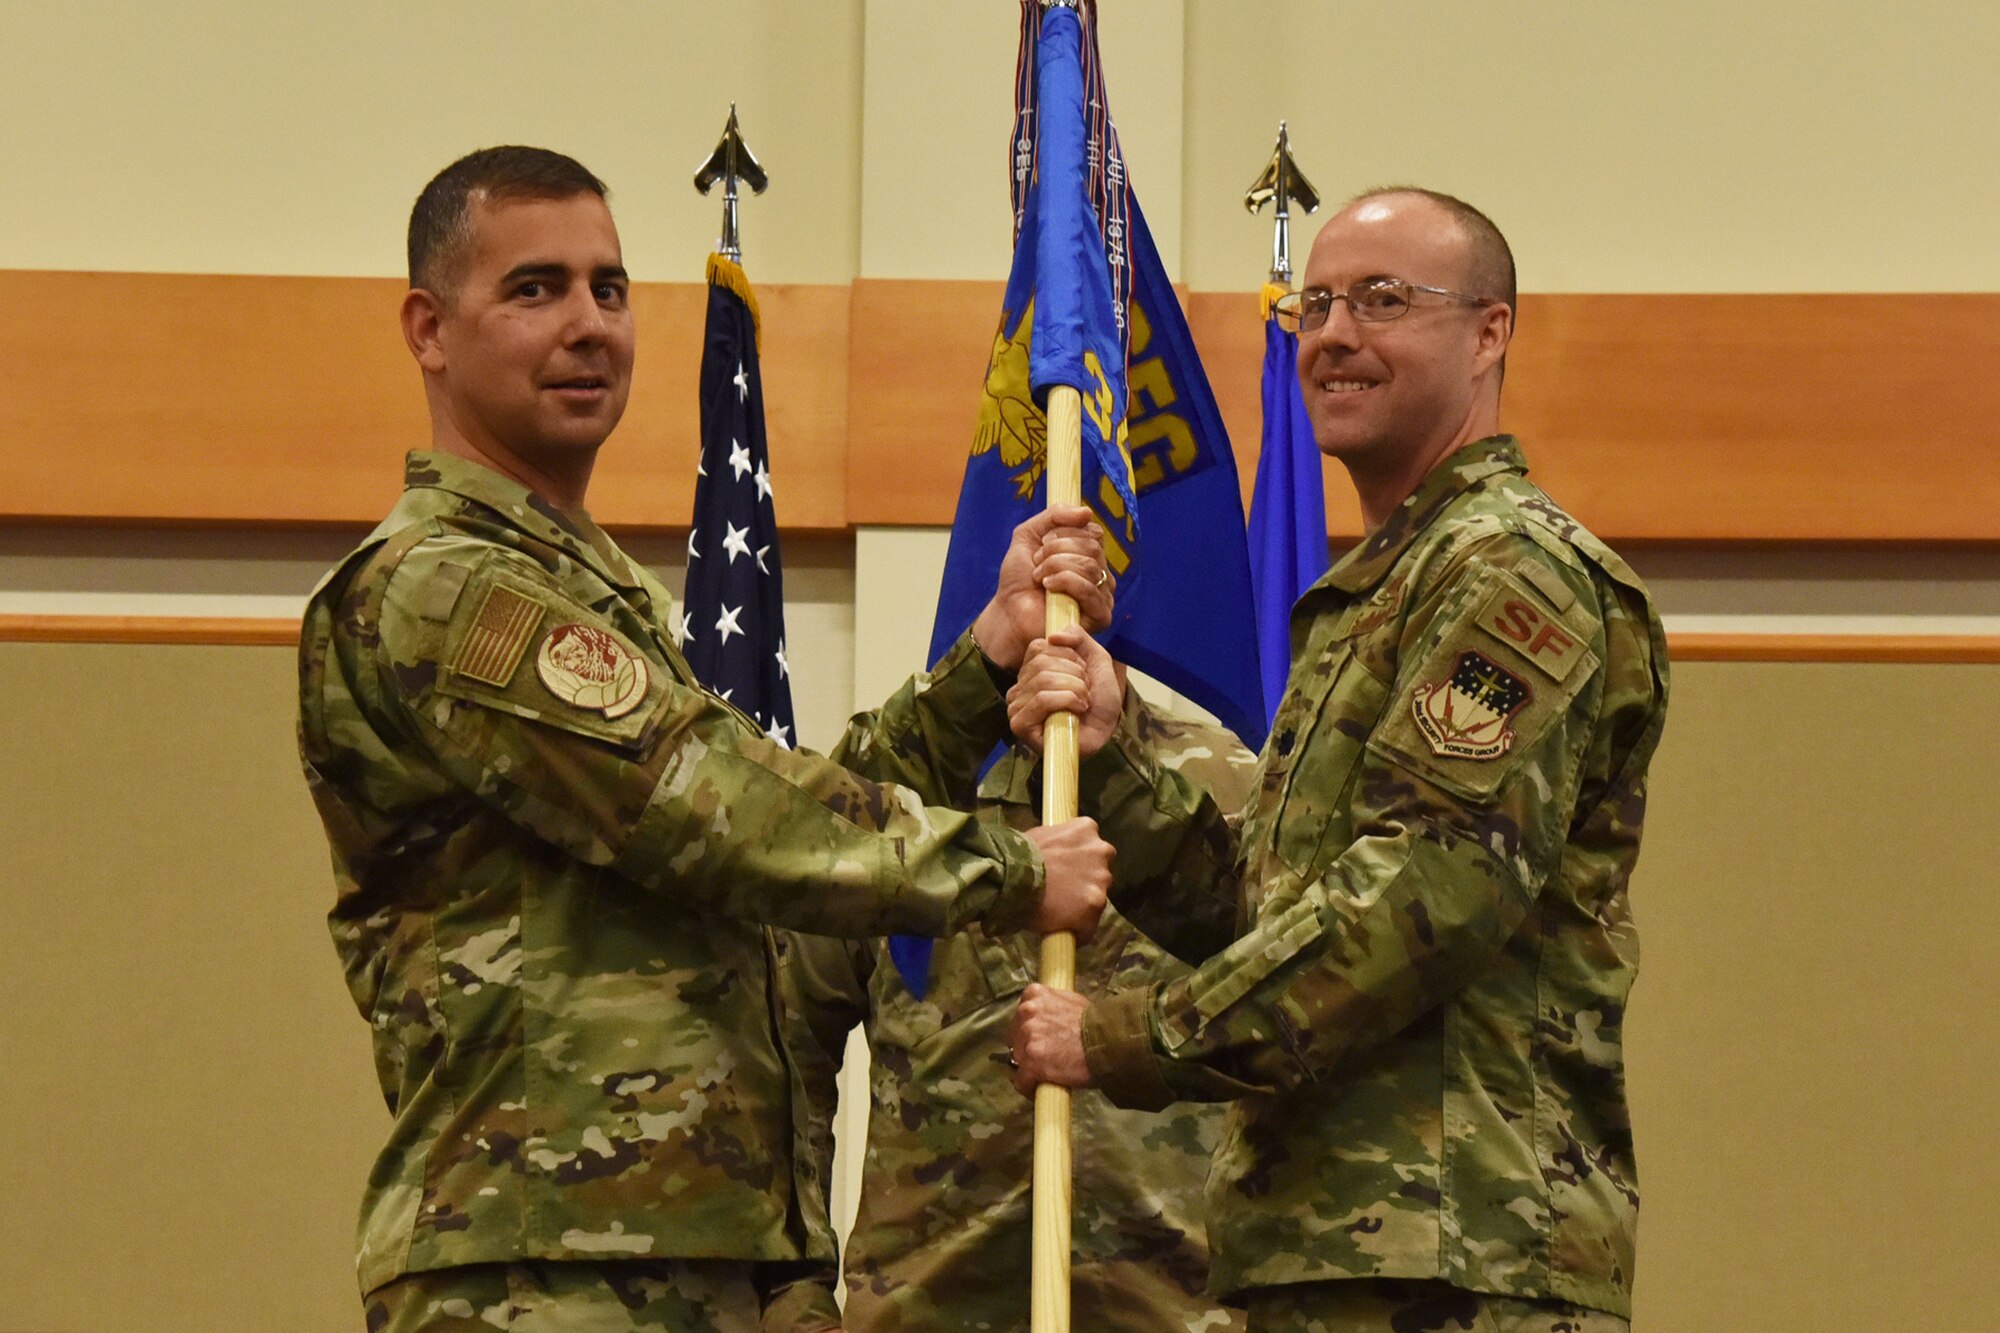 Lt. Col. Joseph Merrill, right, accepts command of the 341st Missile Security Forces Squadron from Col. Frank Reyes, 341st Security Forces Group commander during a change of command ceremony August 2, 2019, at Malmstrom Air Force Base, Mont.